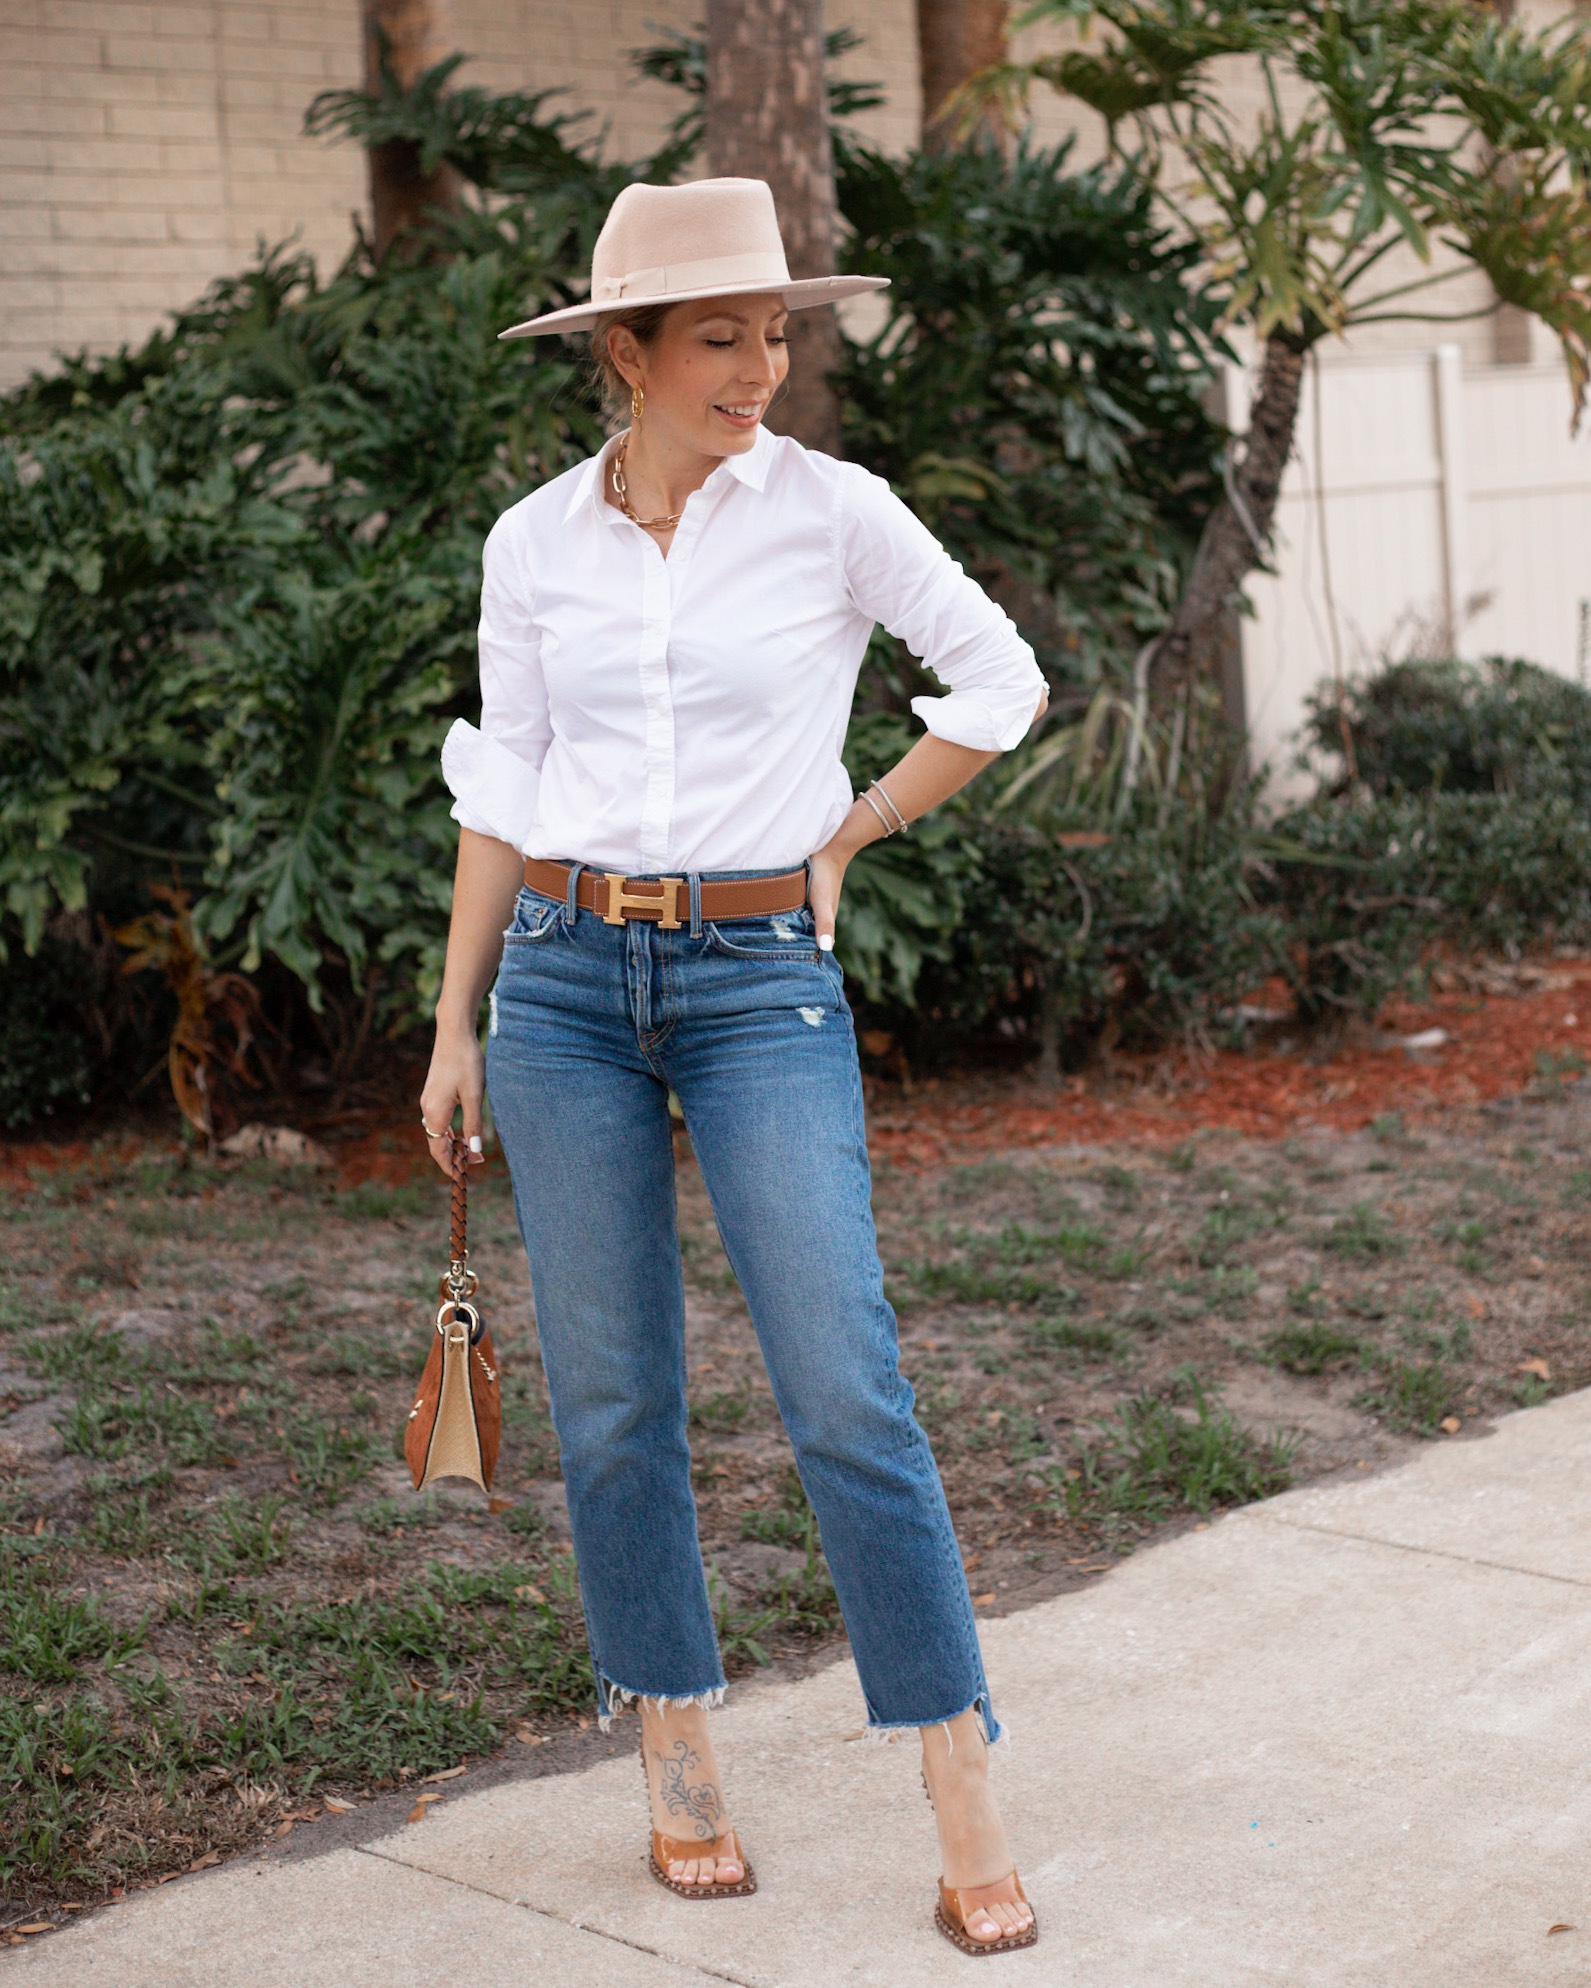 WHITE SHIRT AND JEANS BELTED